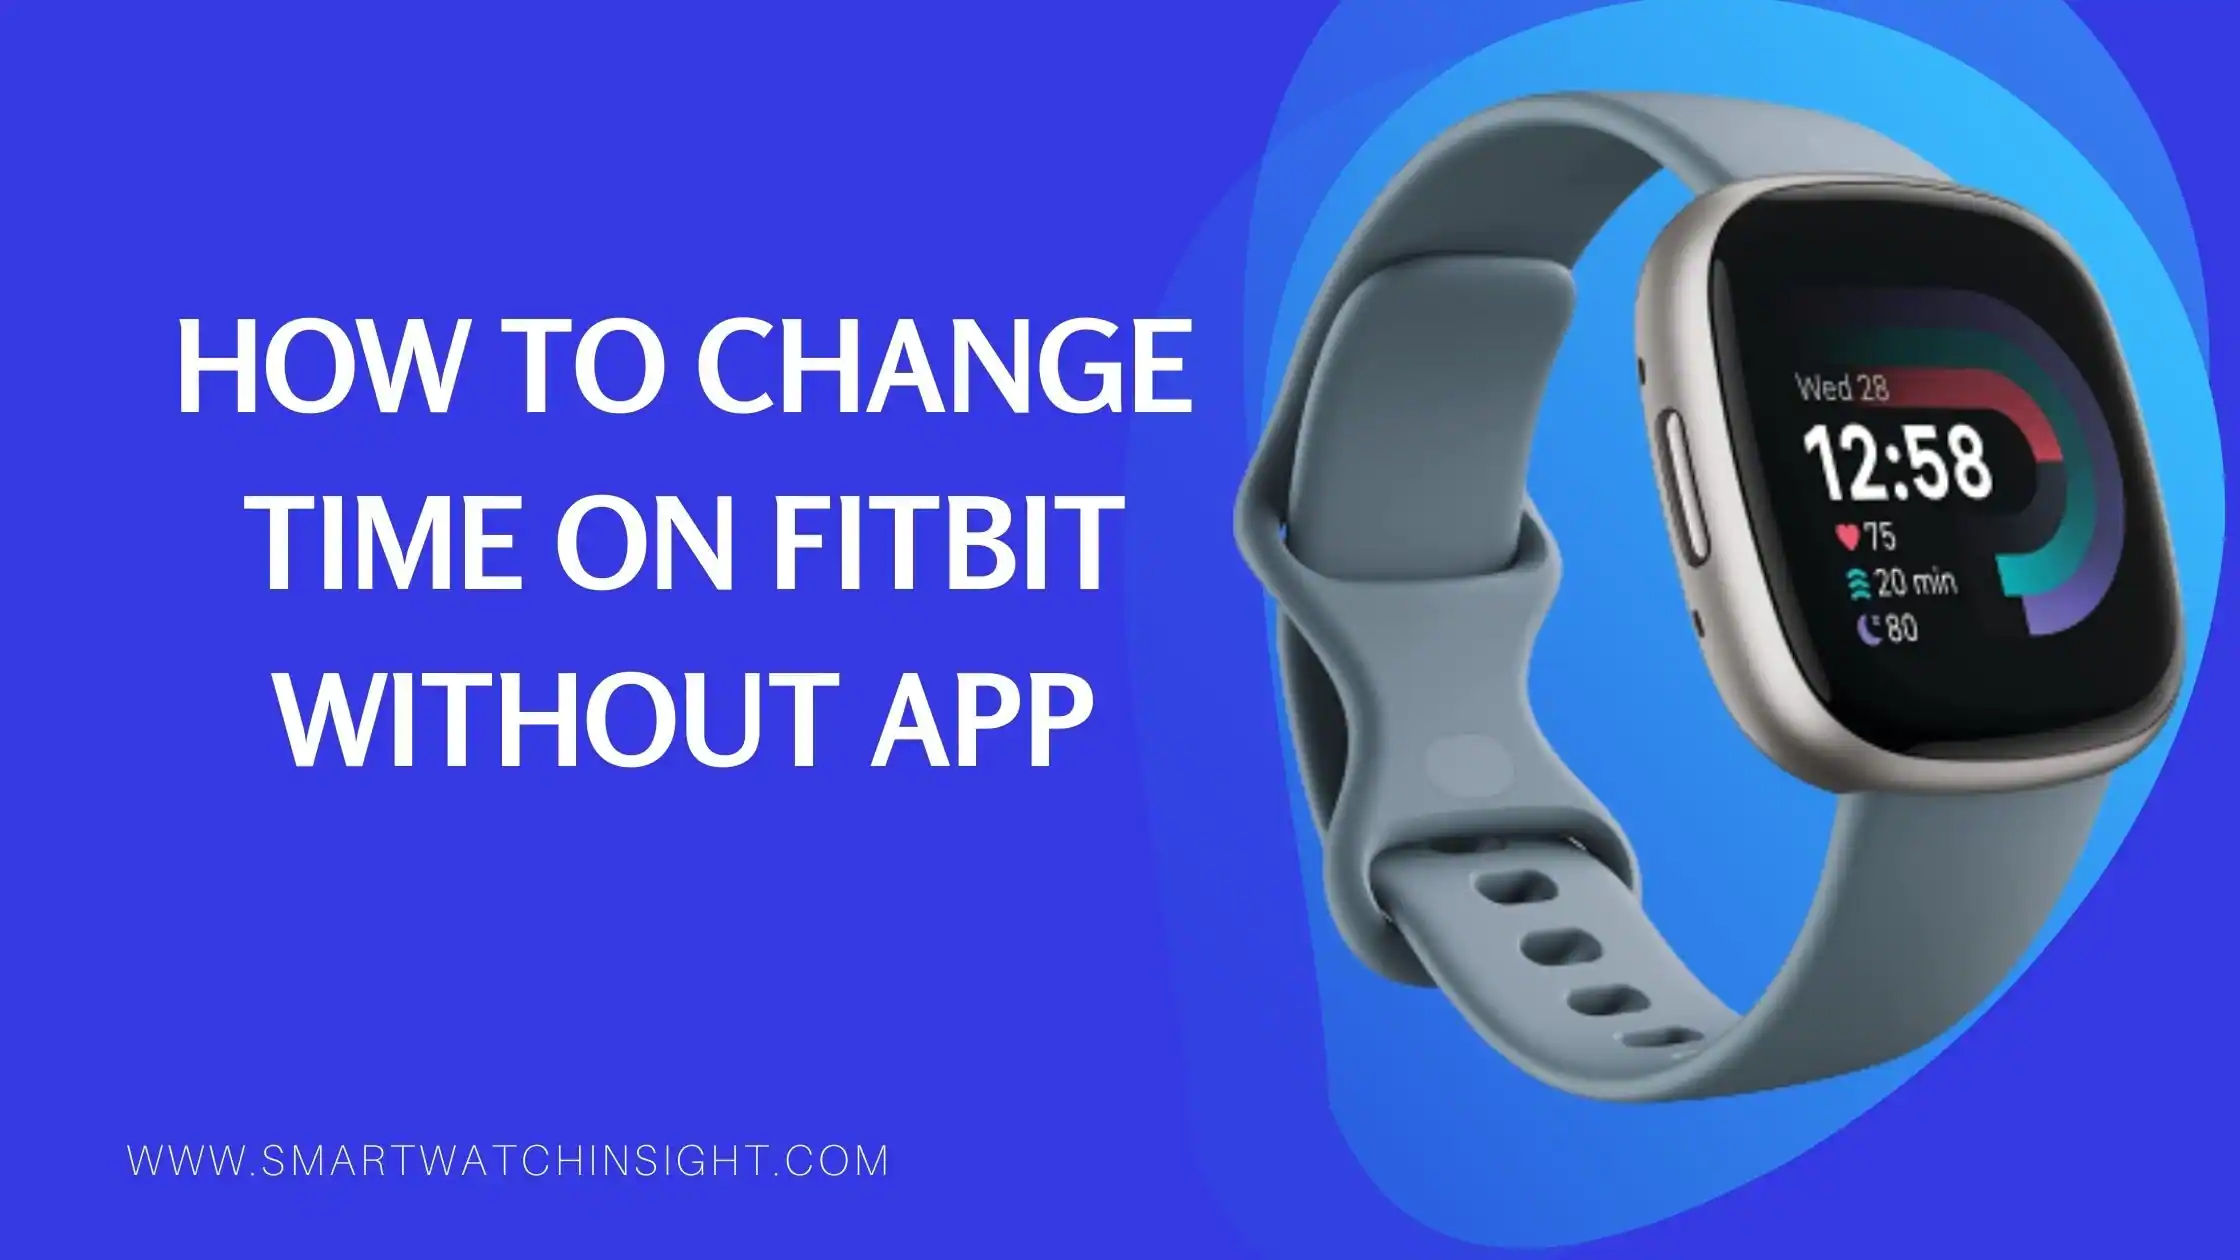 How to Change Time on Fitbit without App